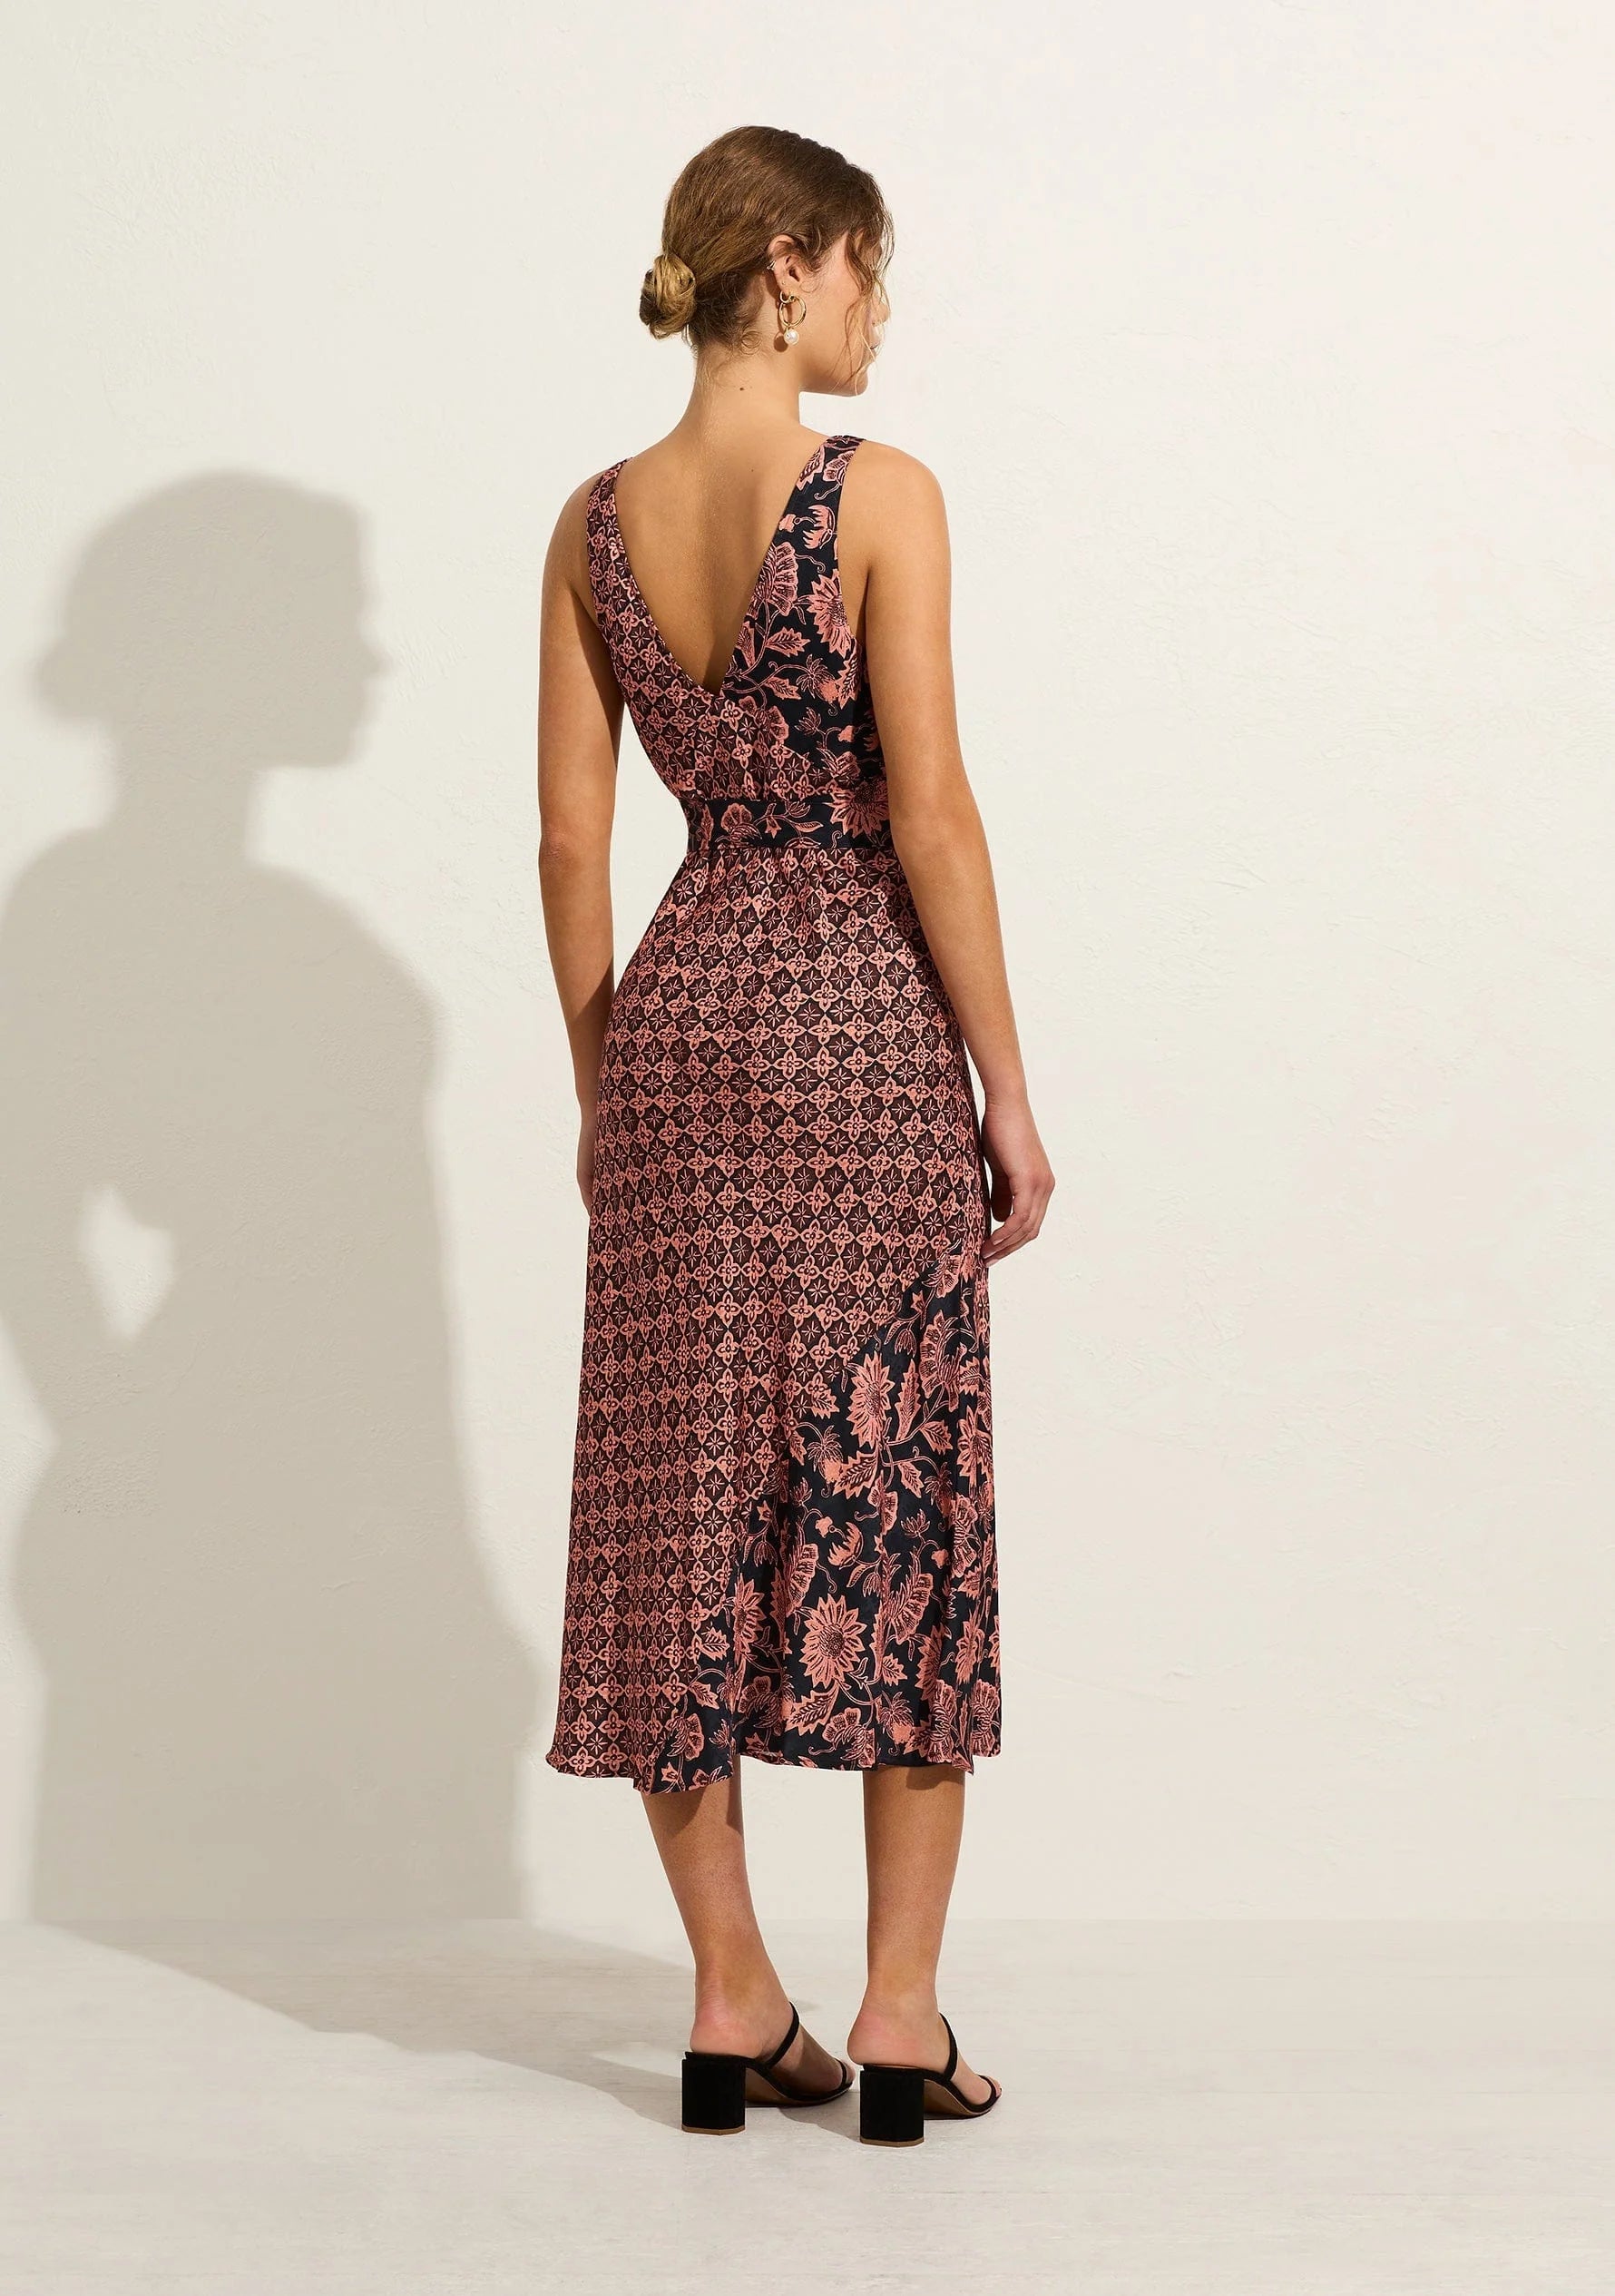 The Mason Midi Dress in contrasting chintz prints makes event dressing effortless. It features a V neckline, softly gathered bust, waist tie for a personalized fit, and a flattering bias-cut silhouette in floral satin finish jacquard with a silky touch.